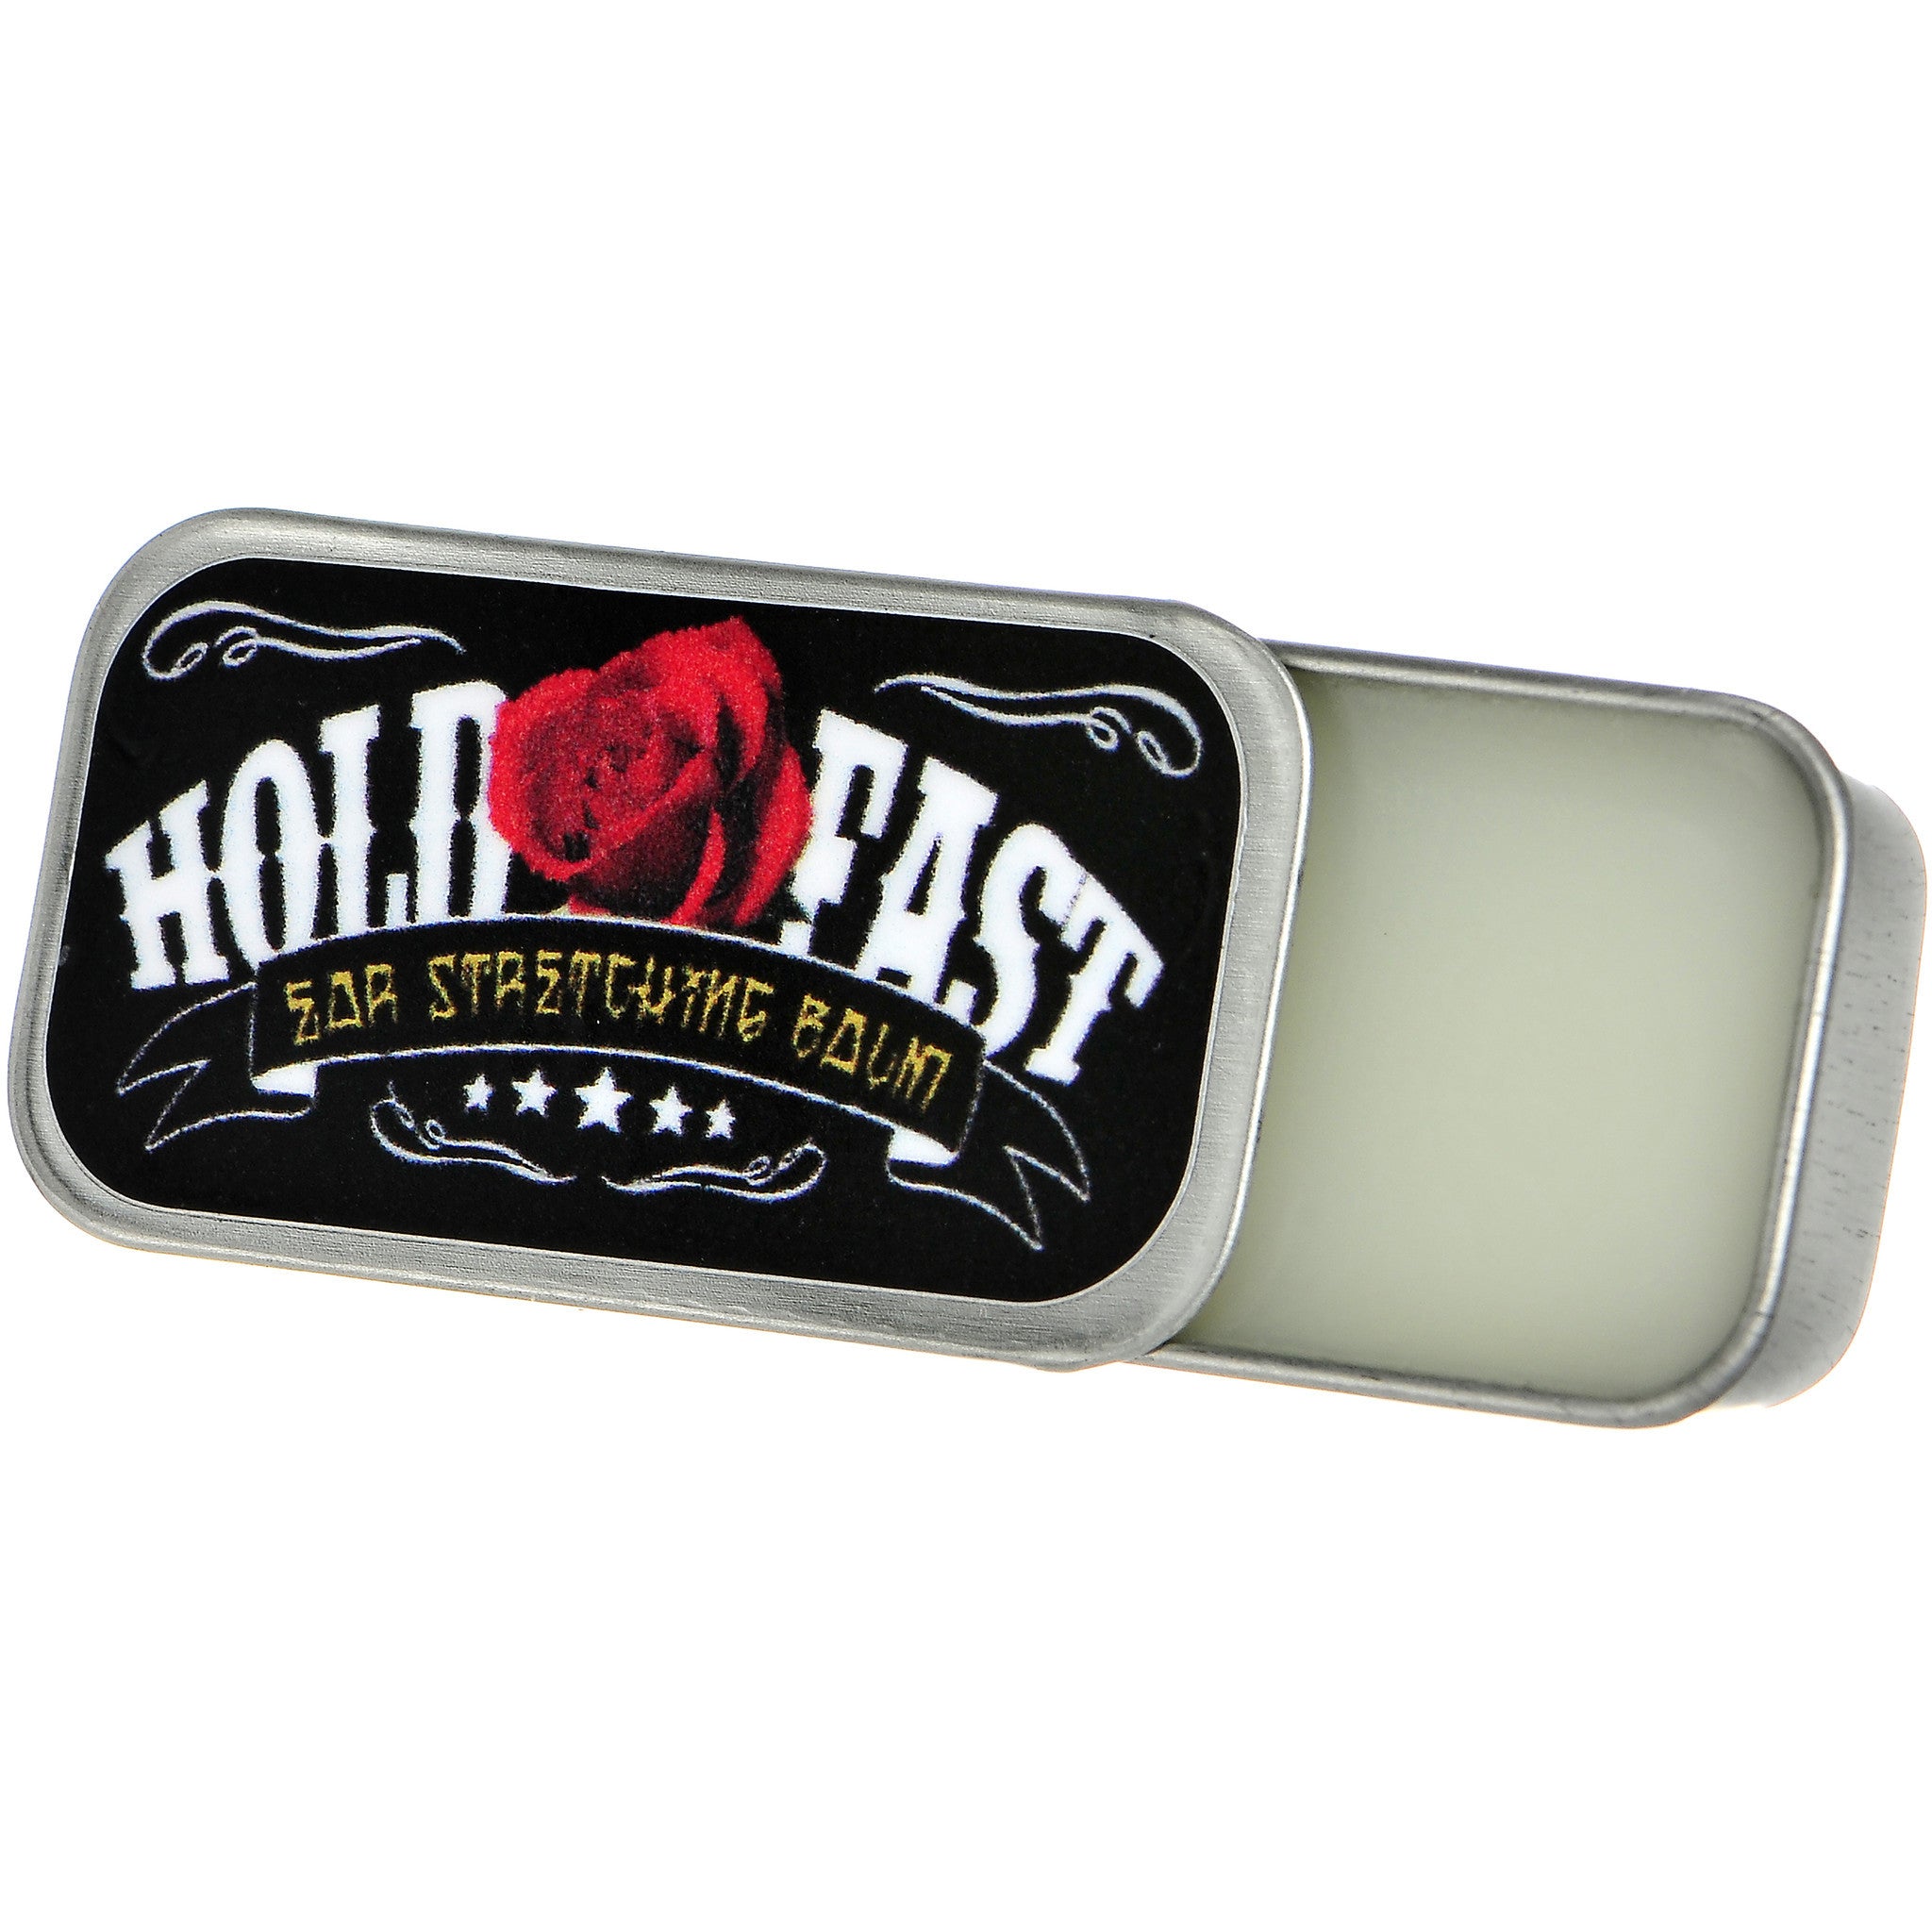 Hold Fast Ear Stretching Balm 7.5 Grams